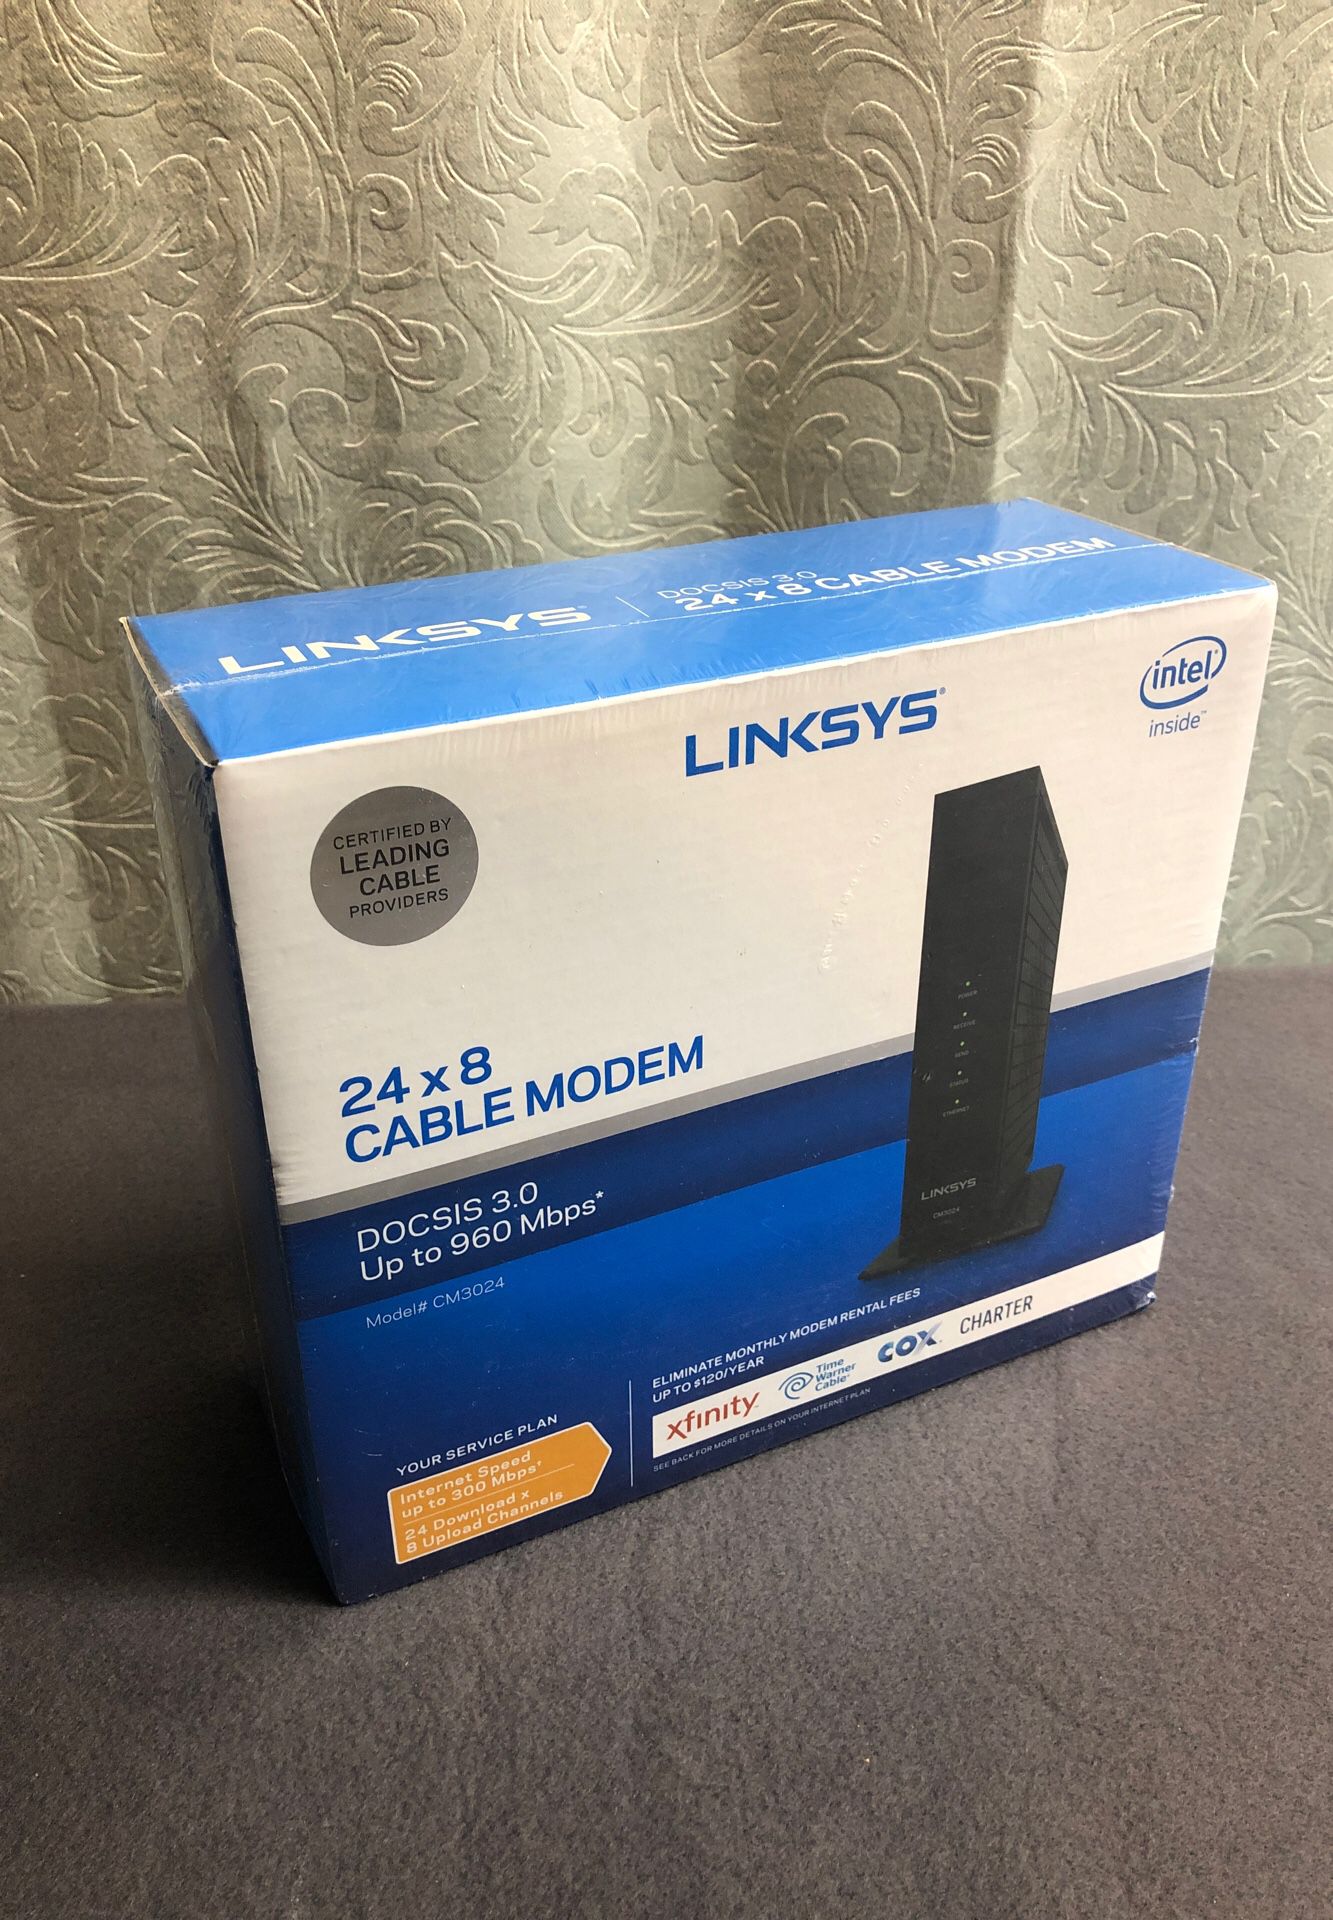 Linksys CM3024 DOCSIS 3.0 Cable Modem Brand New, Still sealed in plastic. Asking 50